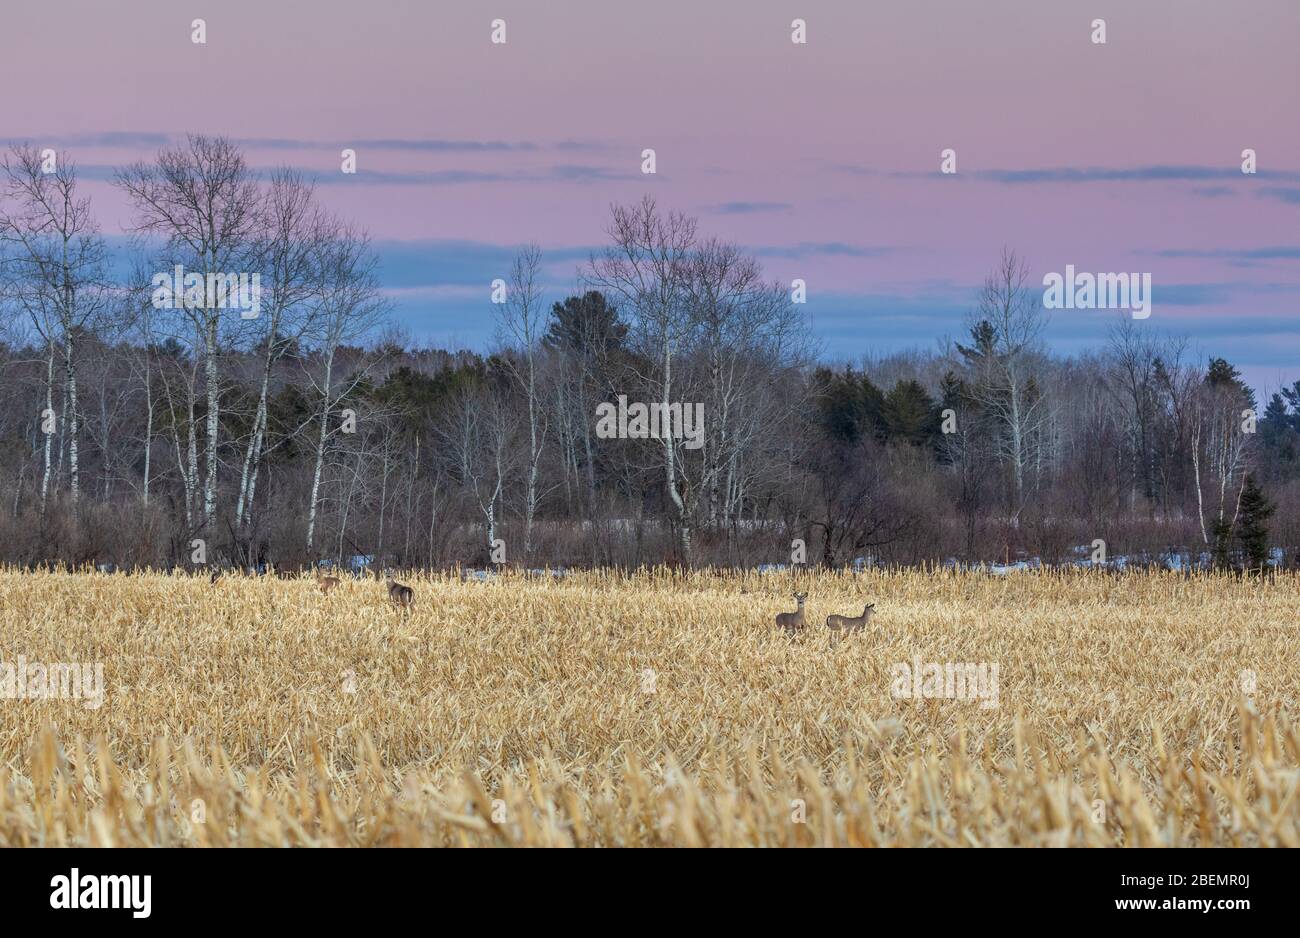 Whitetails in a cornfield in northern Wisconsin. Stock Photo